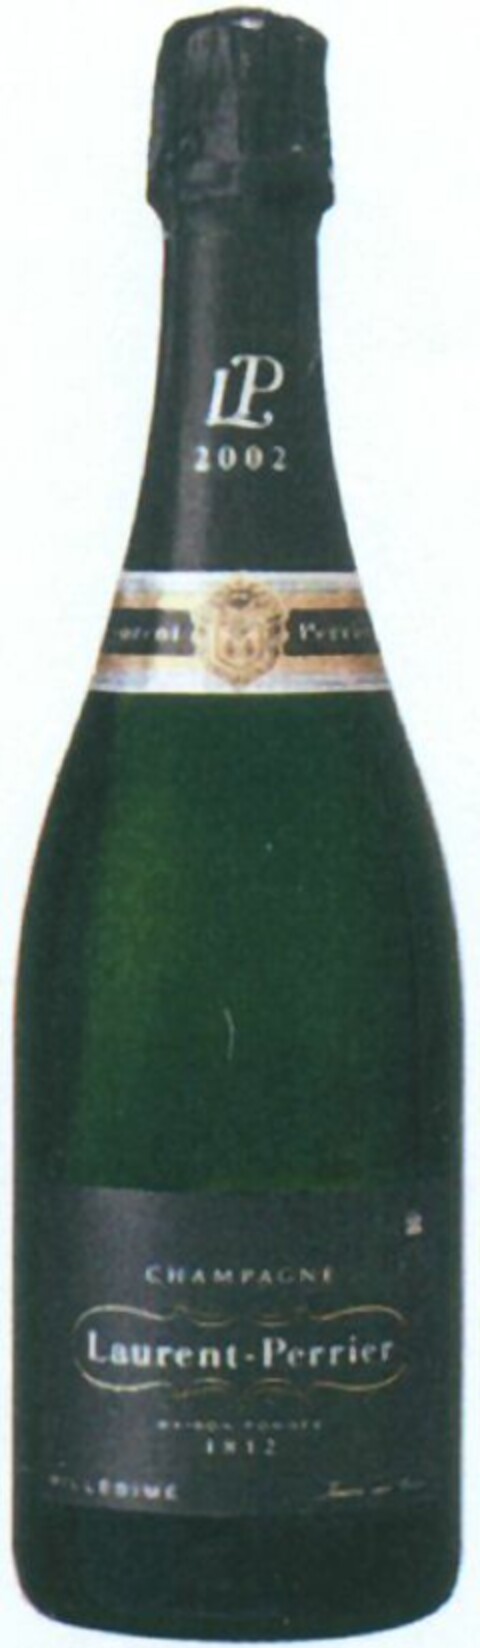 LP 2002 CHAMPAGNE Laurent-Perrier Logo (WIPO, 02/08/2011)